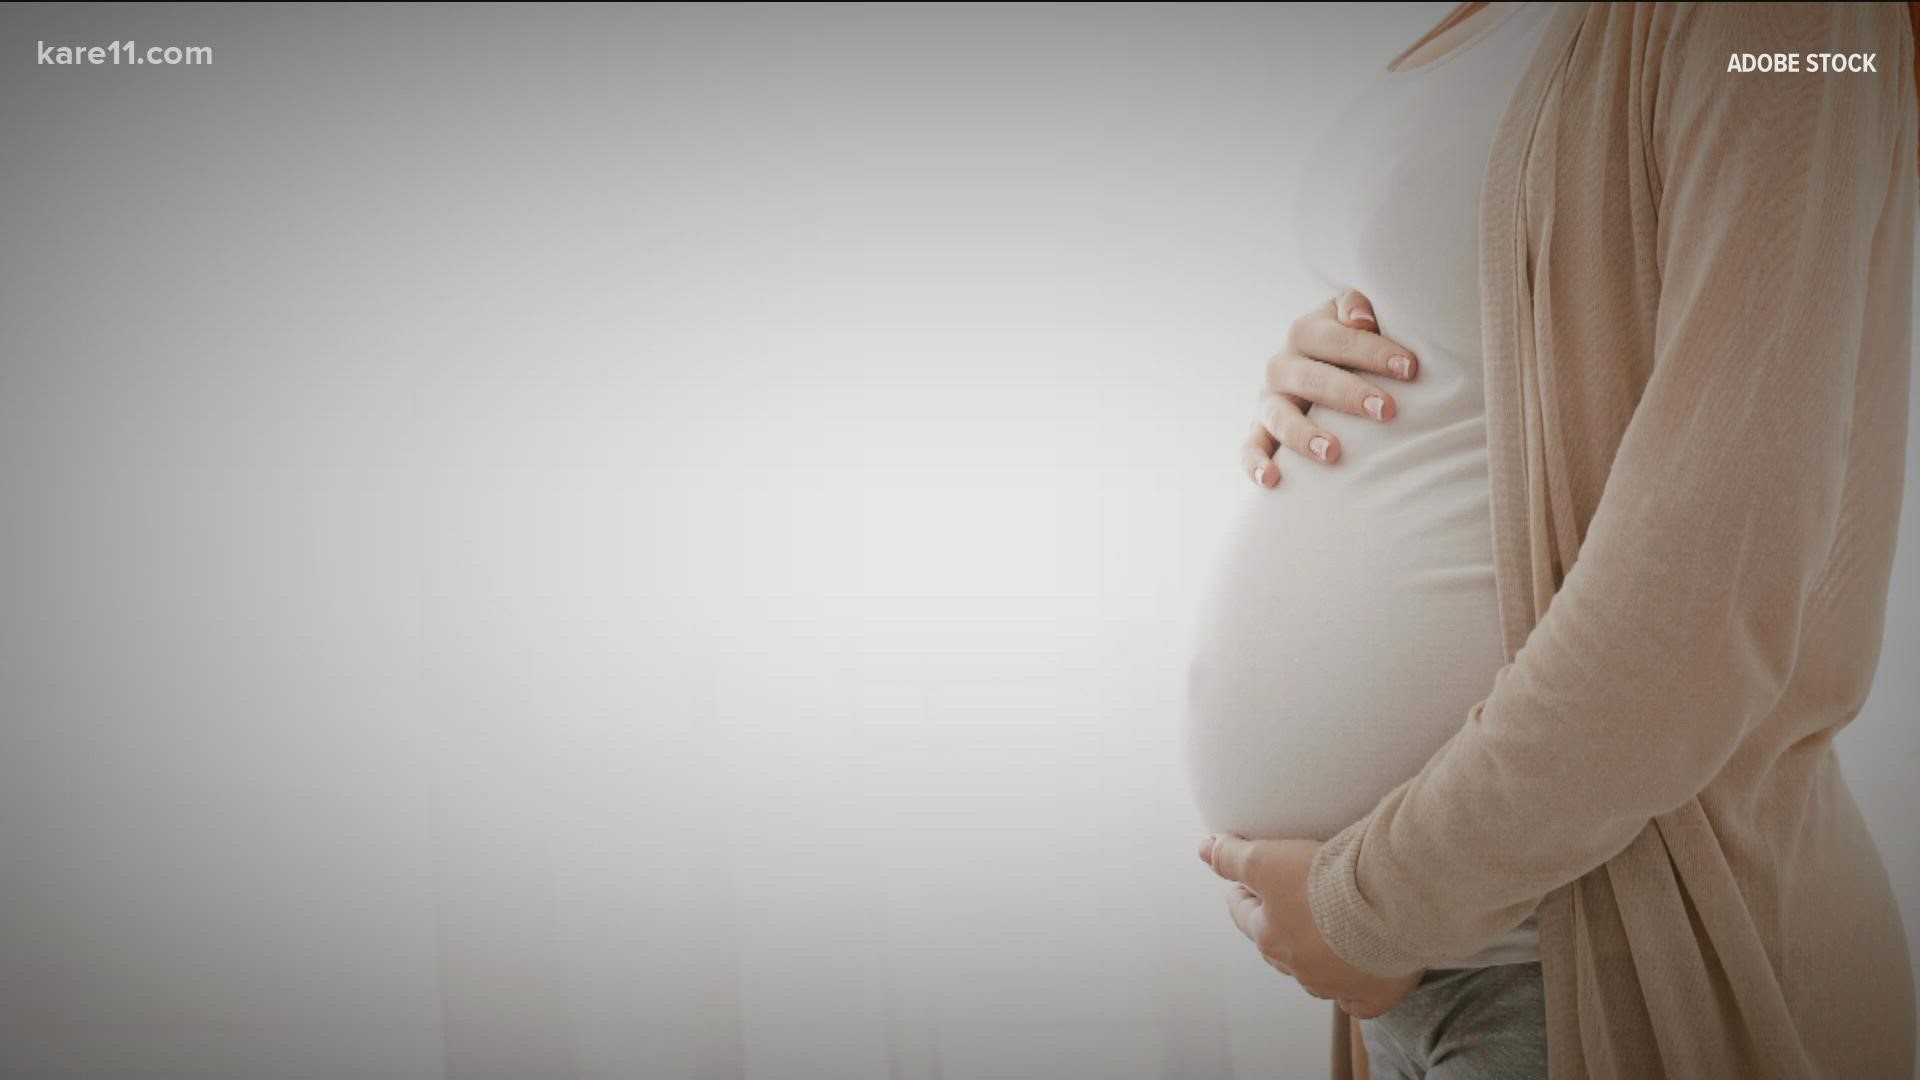 CDC says vaccination rates among people who are pregnant show room for improvement, especially among Black, Hispanic.